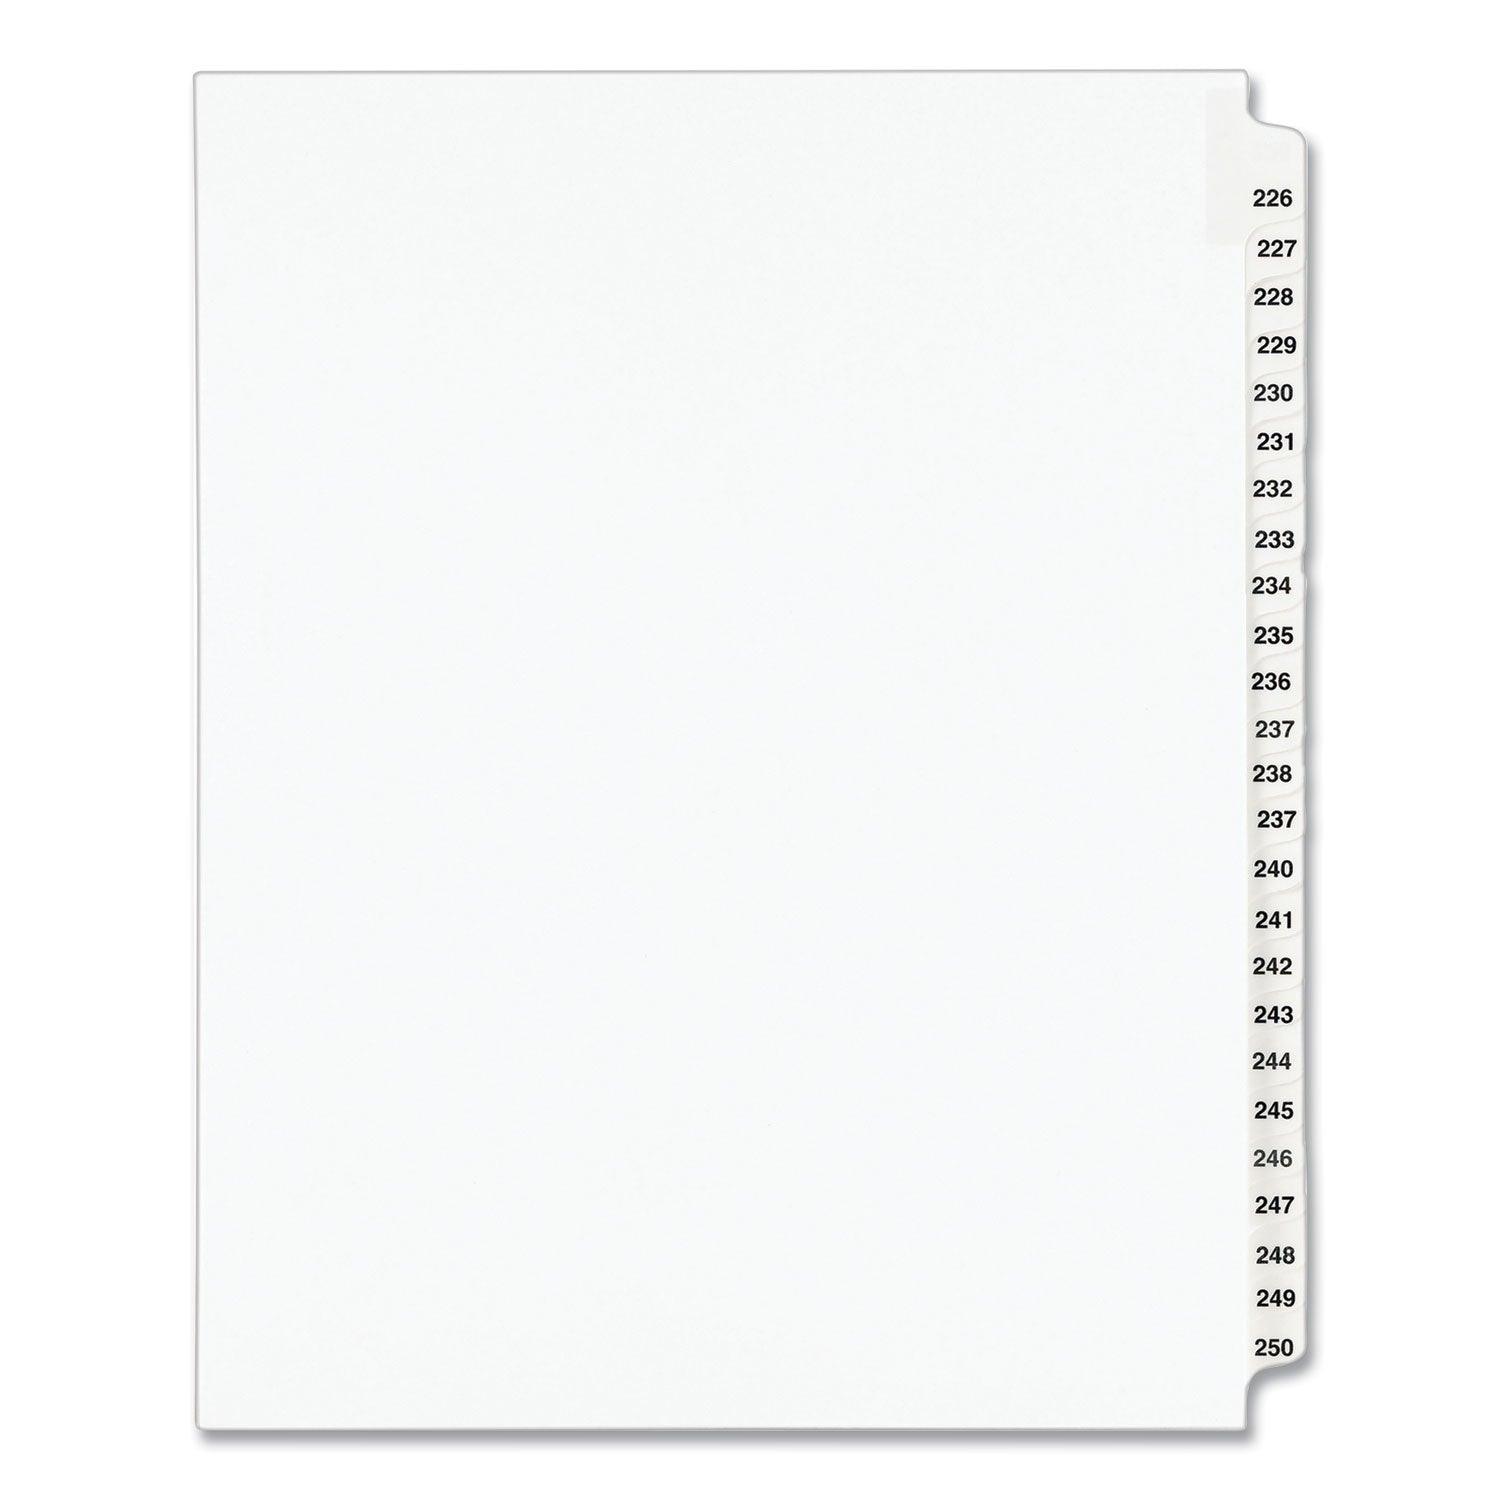 Preprinted Legal Exhibit Side Tab Index Dividers, Avery Style, 25-Tab, 226 to 250, 11 x 8.5, White, 1 Set, (1339) - 